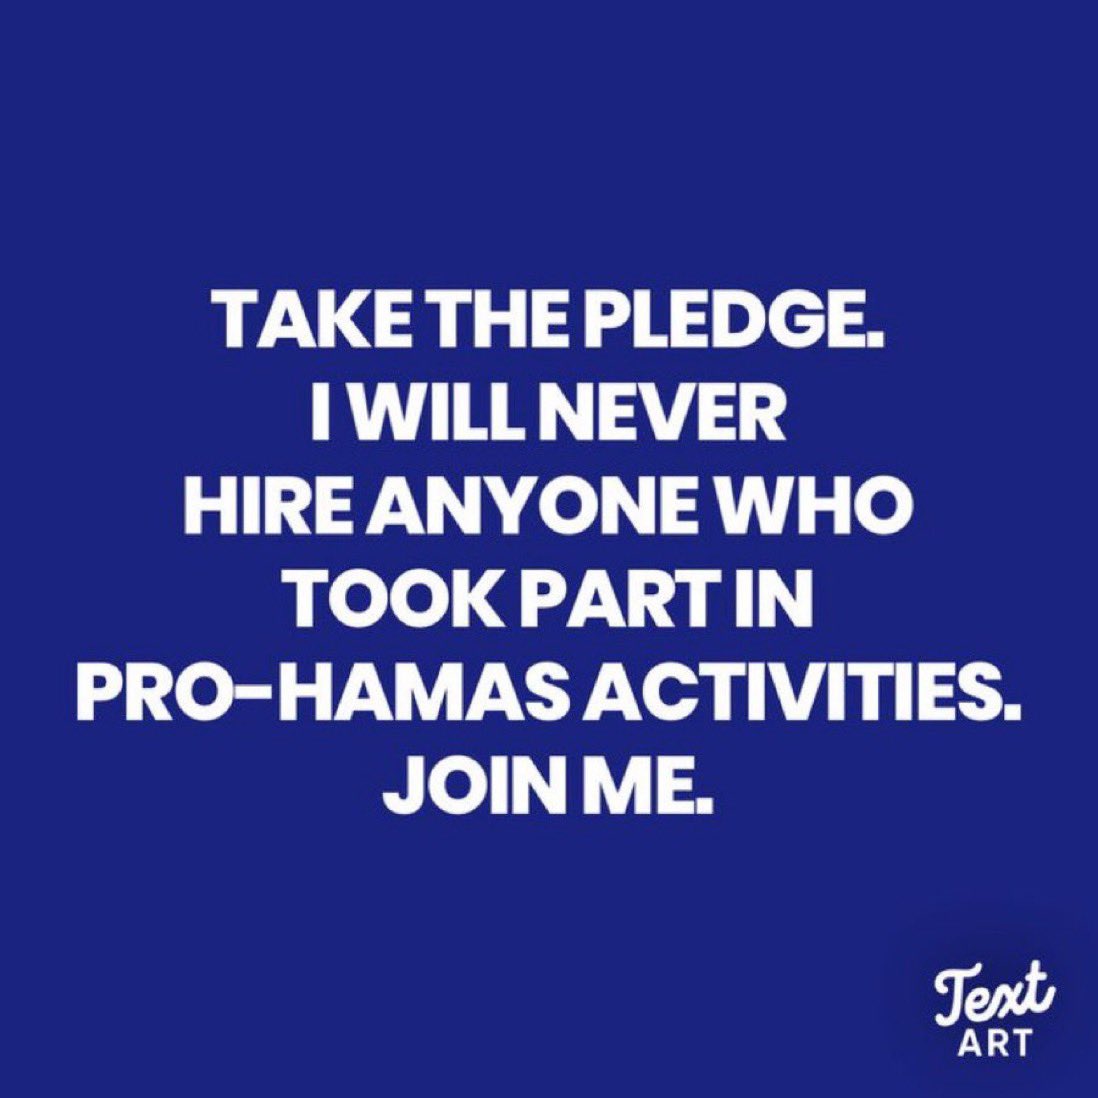 If you are a pro Hamas protester, do not ask me for a job. I will check your social media accounts. I will check the databases of places like @canarymission @adl and others. You will not be hired. I will not bring Jew haters into my company. Your parents are throwing away